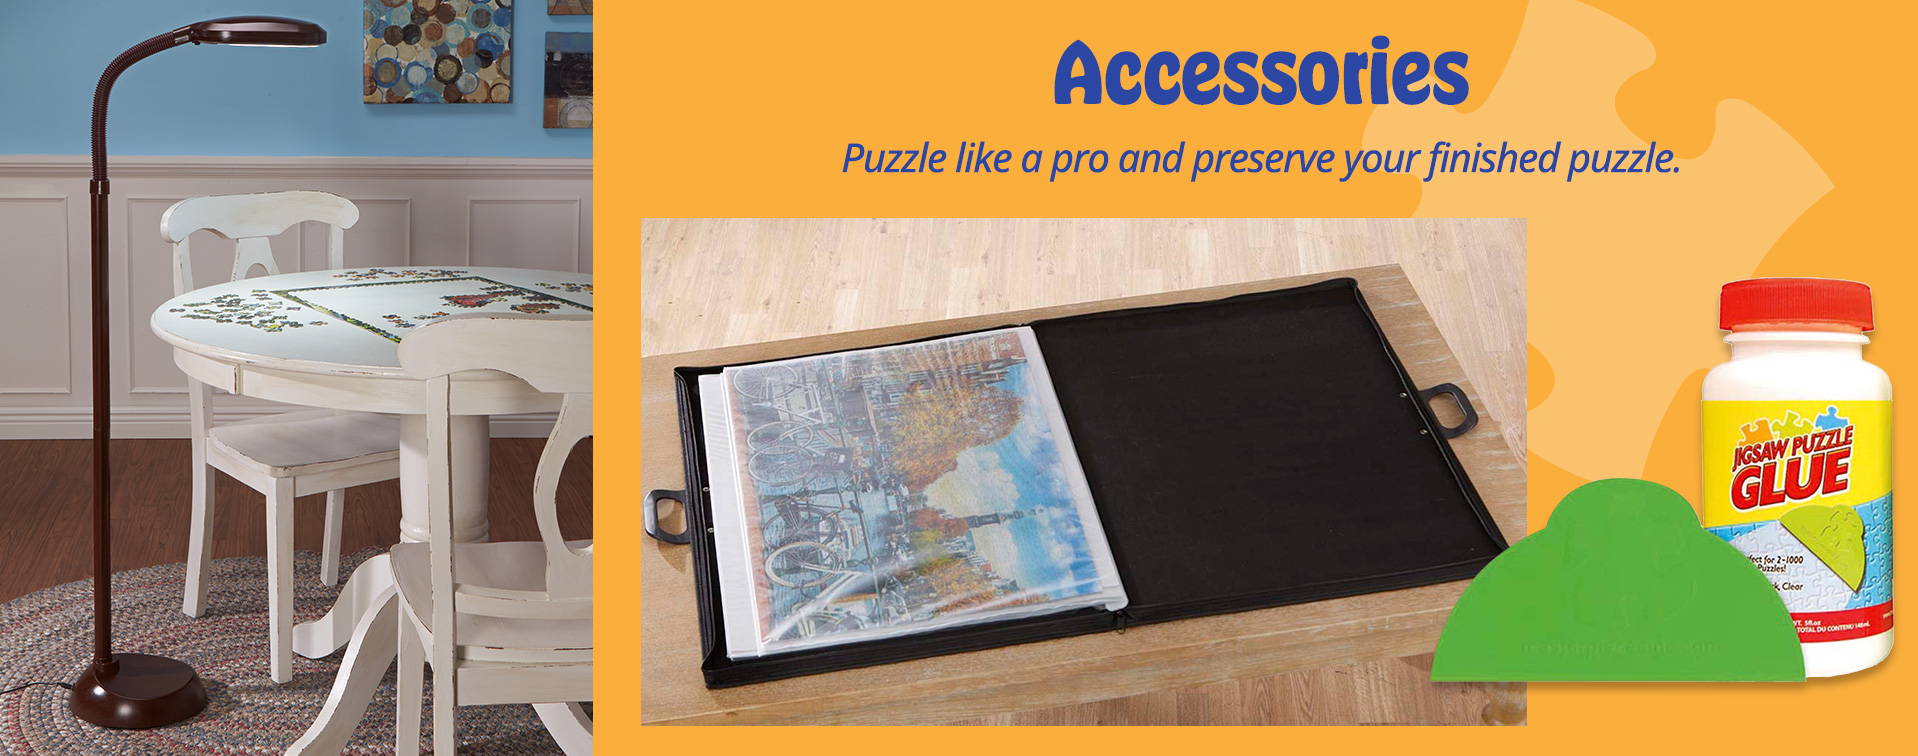 Puzzle Accessories - Puzzle like a pro and preserve your finished puzzle. 